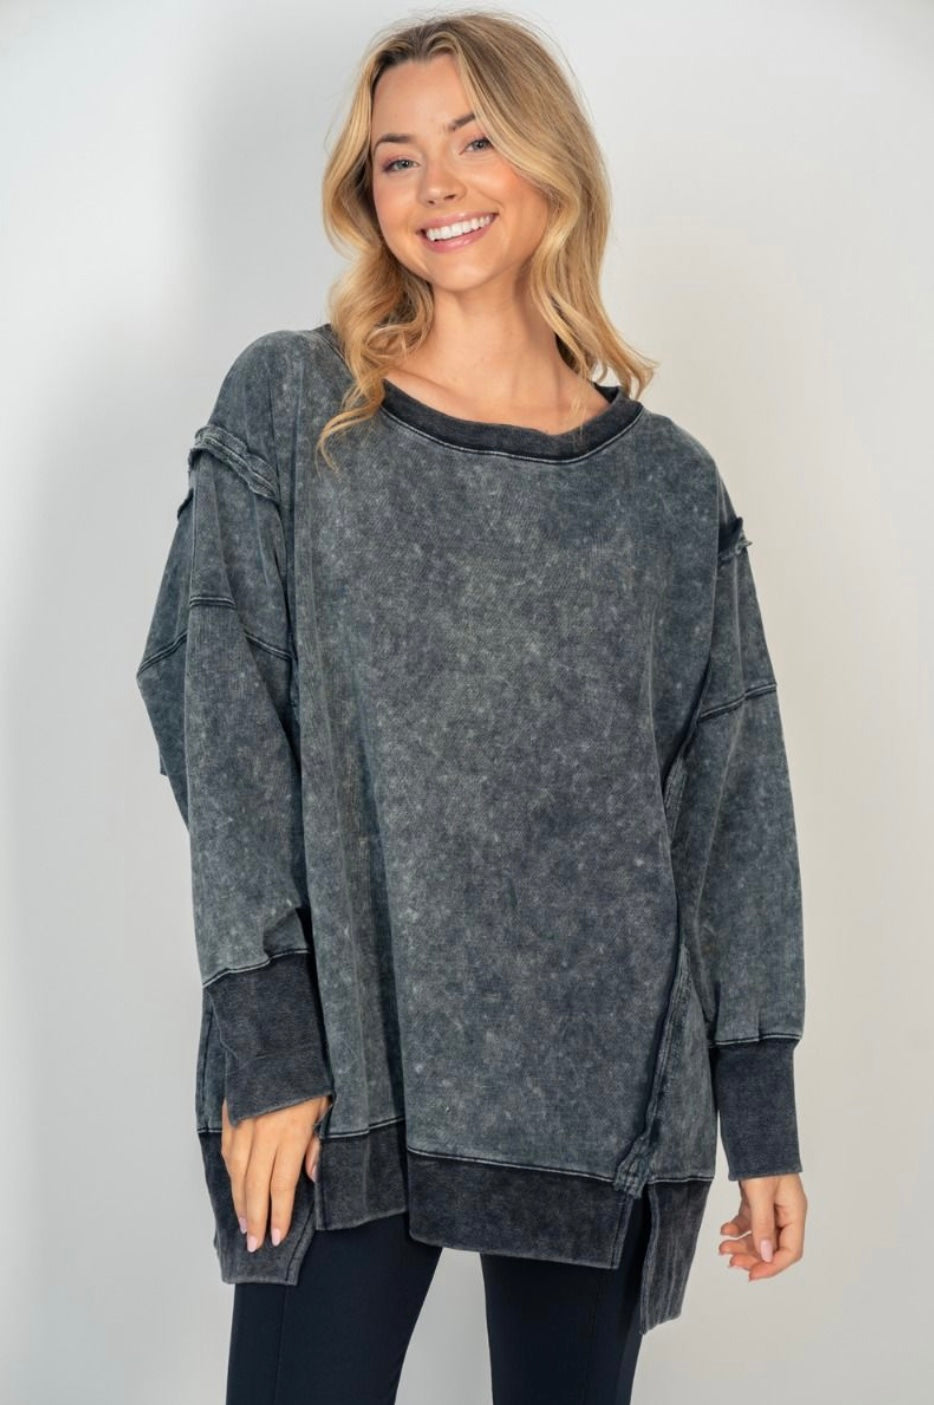 Mineral Washed Sweatshirt (2 Colors)